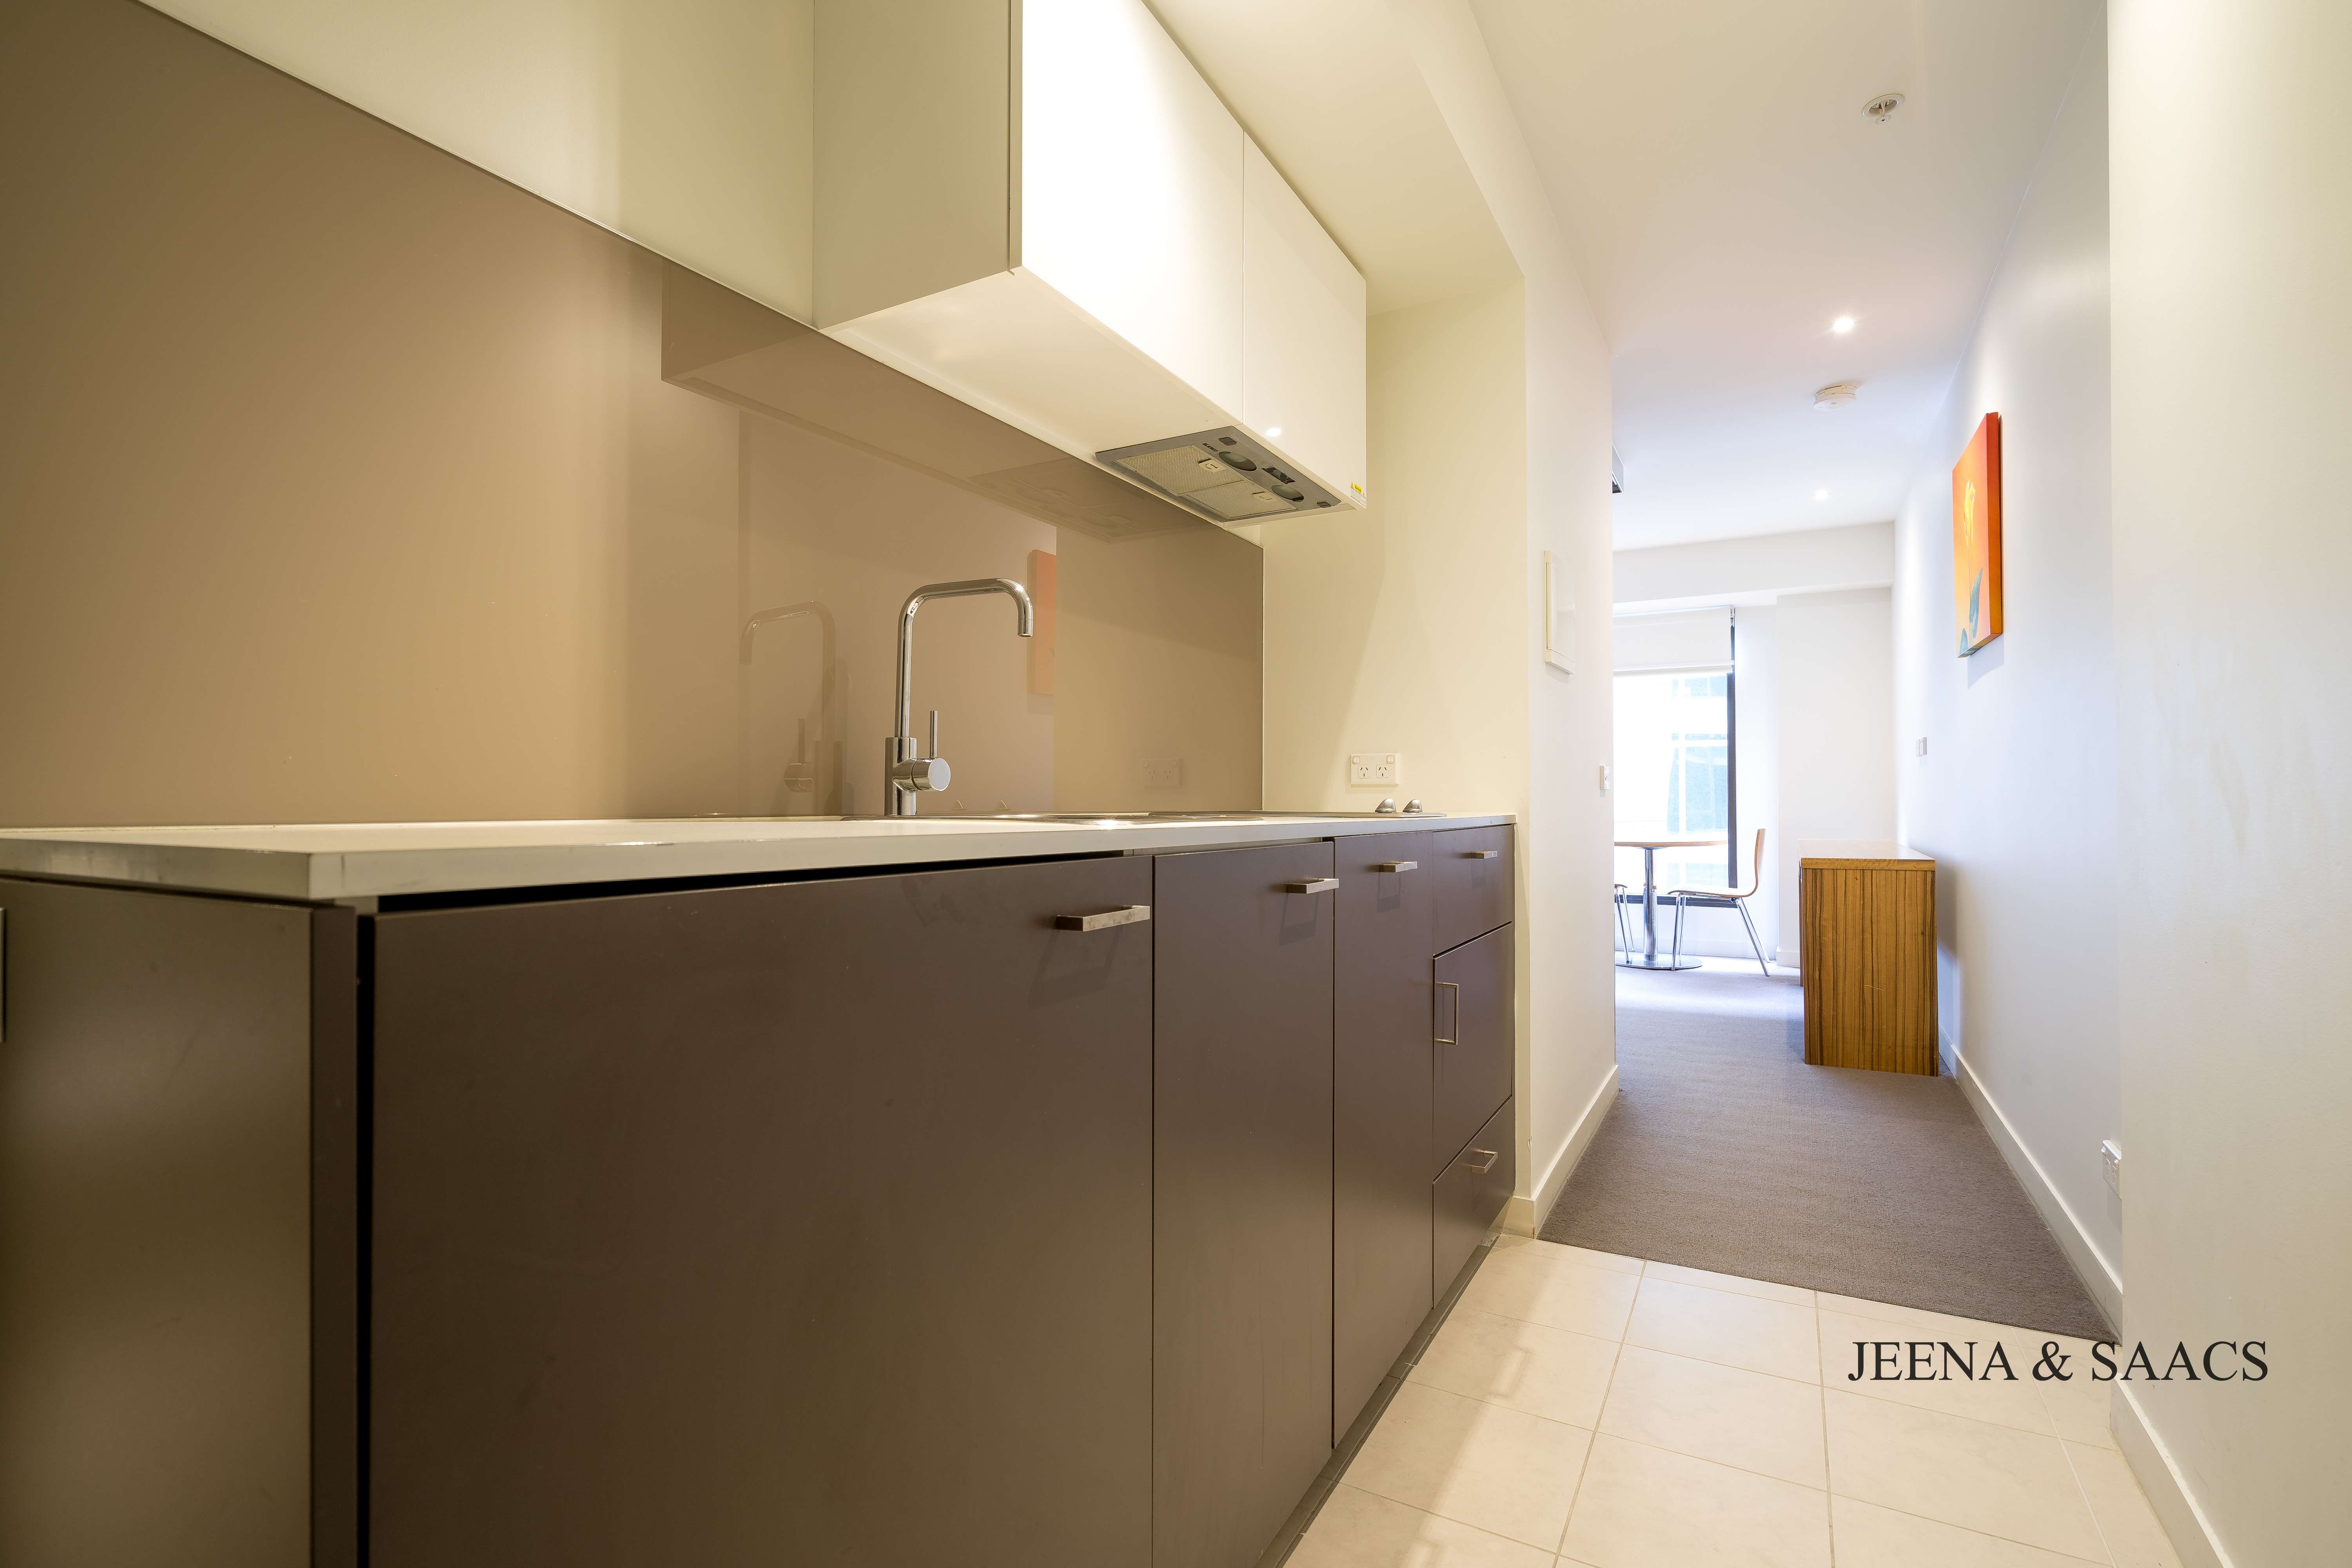 Furnished Apartment In The Heart Of St Kilda Rd